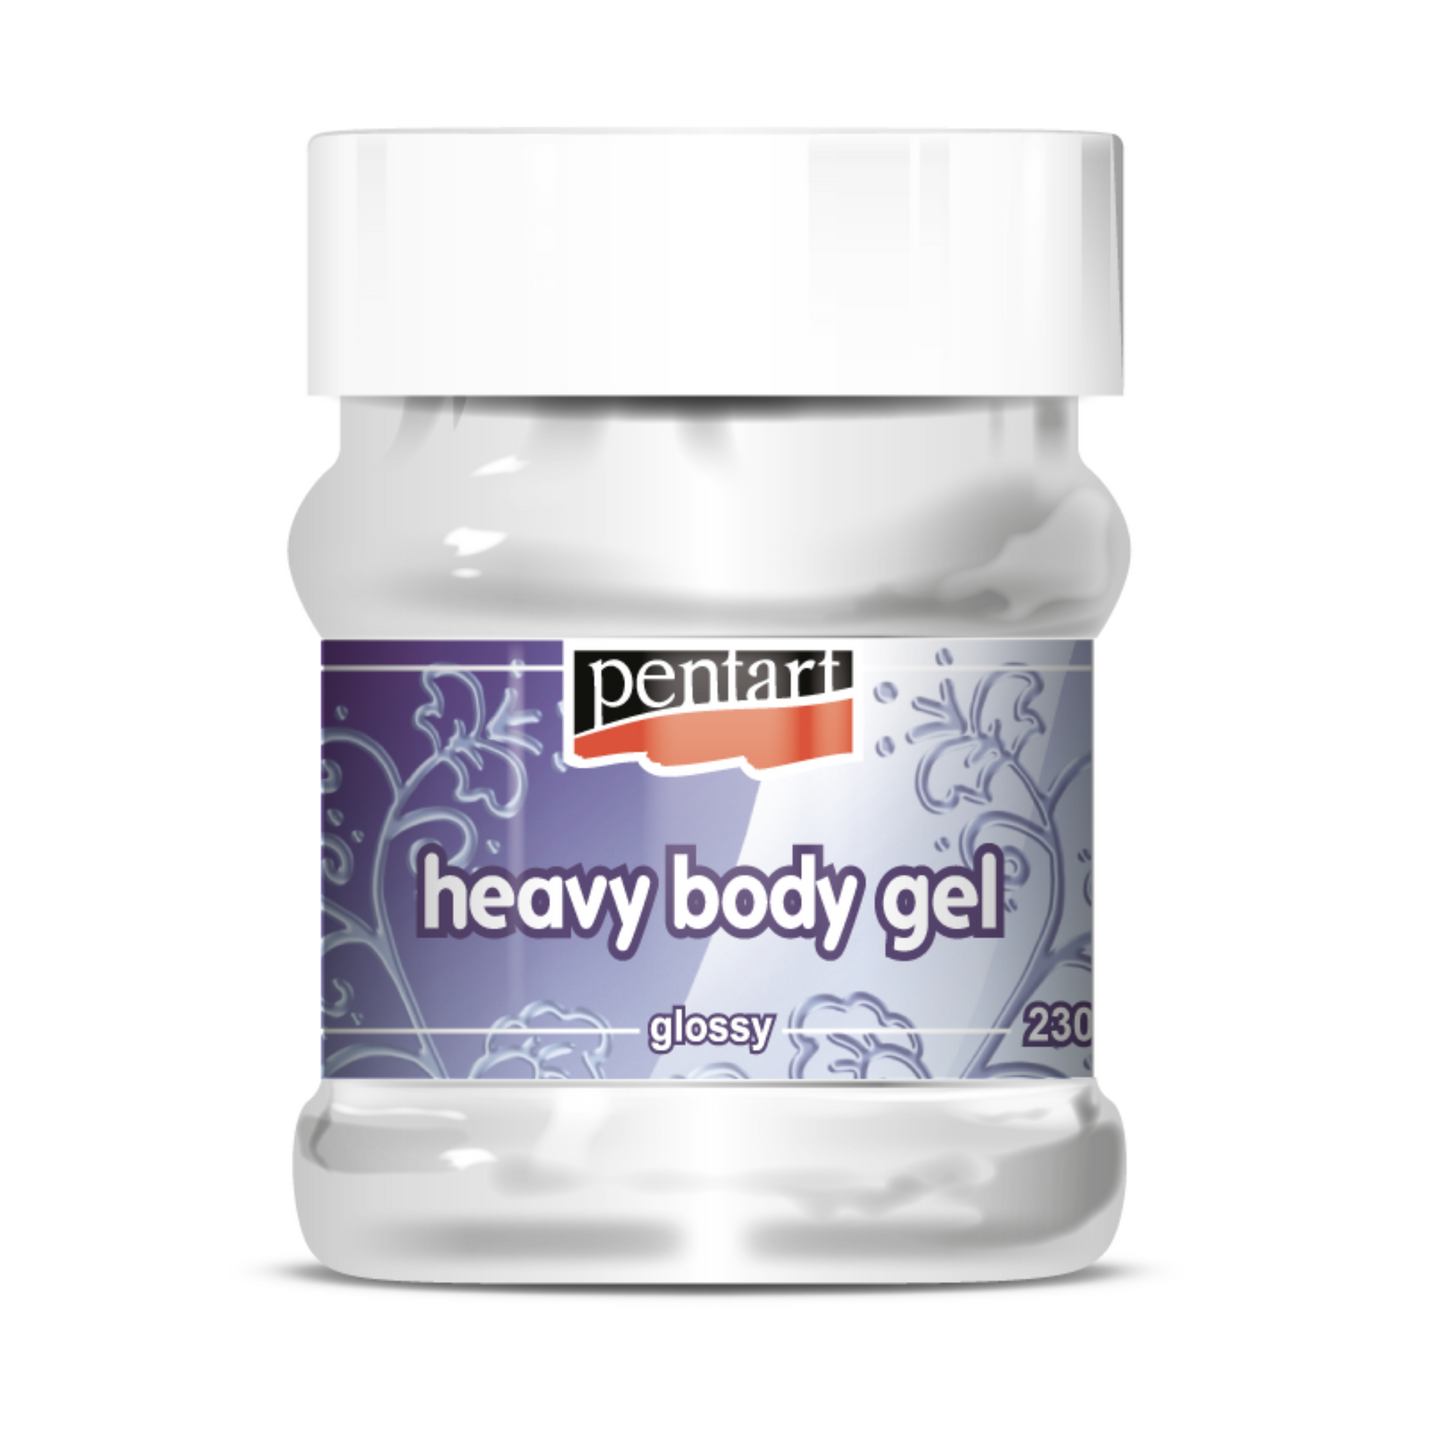 Heavy Body Gel Glossy by Pentart available at Milton's Daughter.